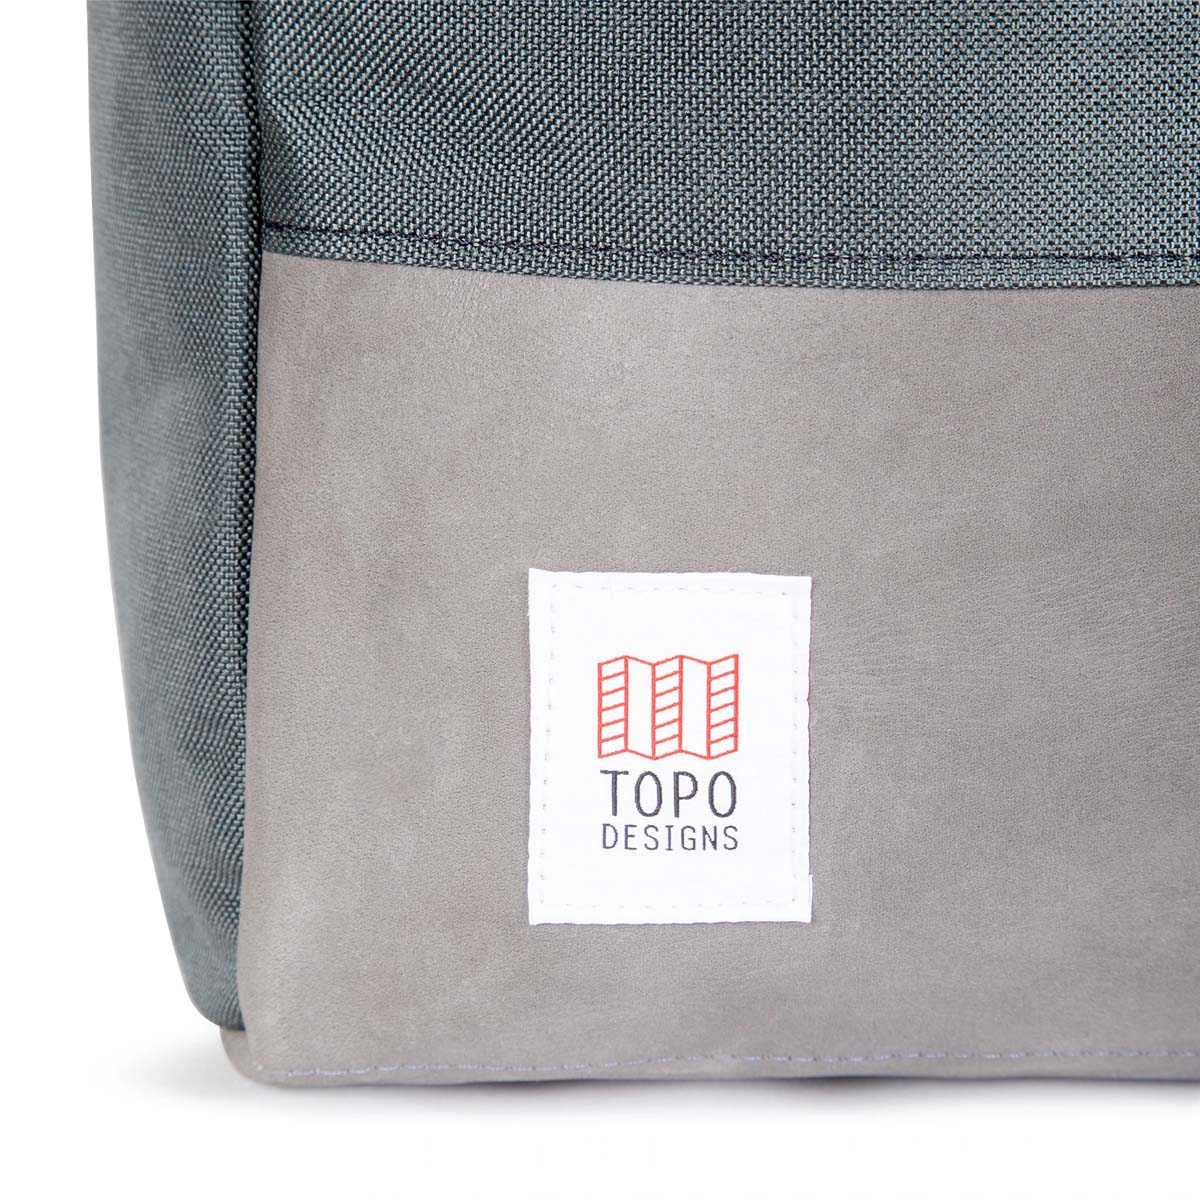 Topo Designs Daypack Charcoal/Charcoal Leather, classic backpack in 1000d Cordura with 15" laptopsleeve